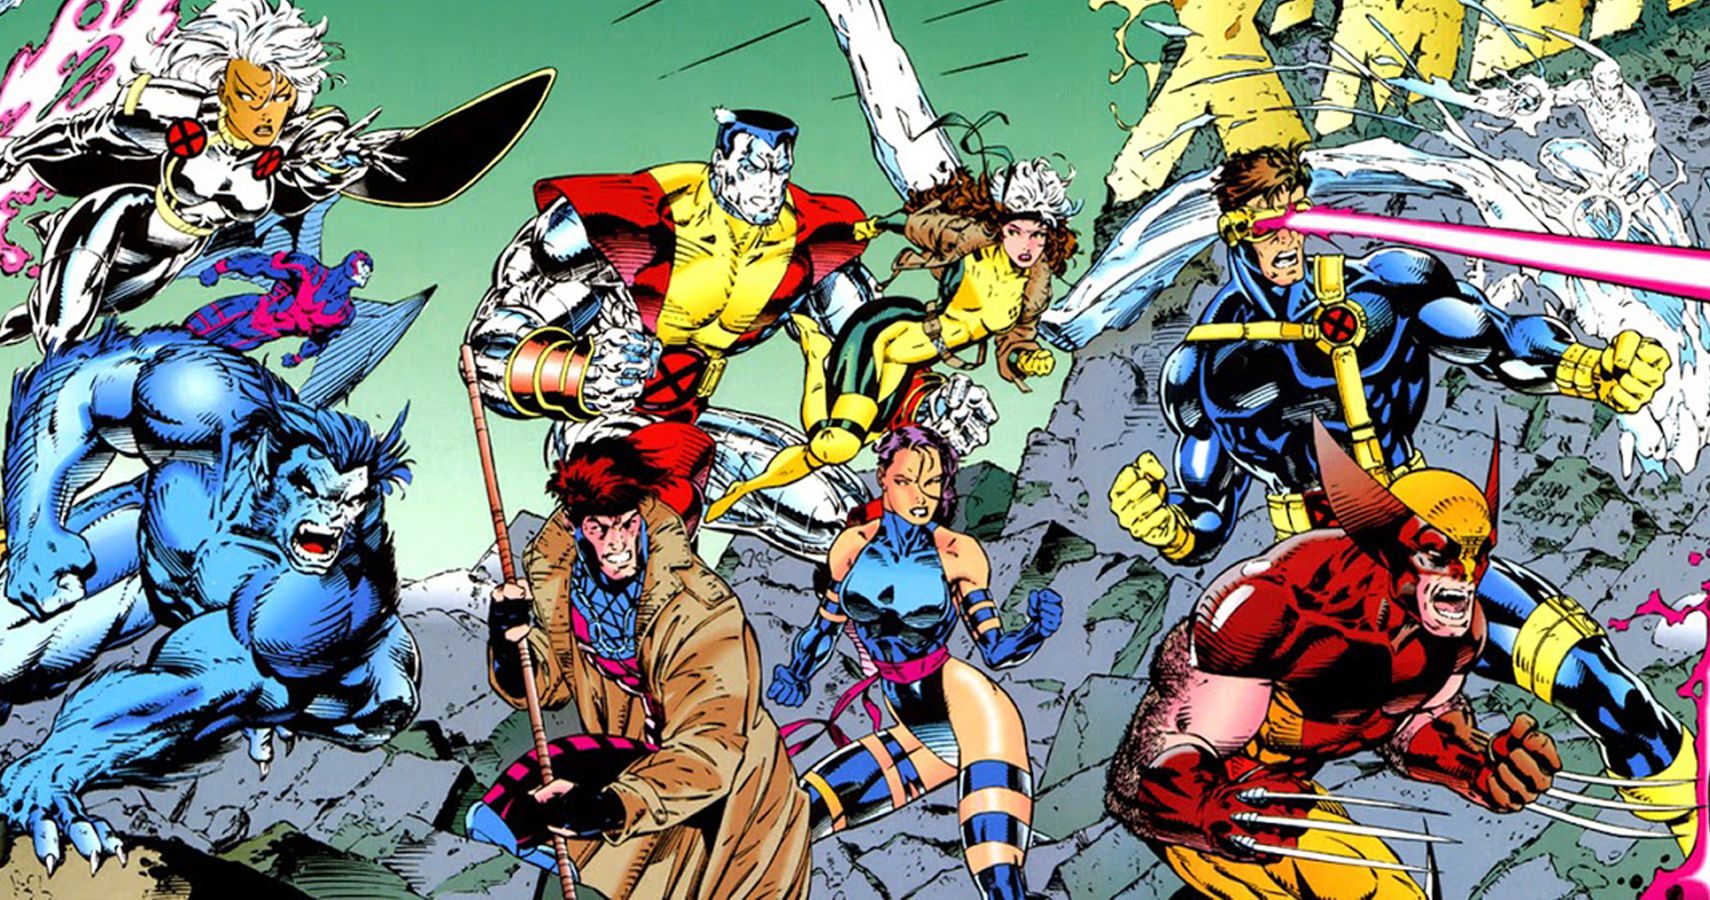 The X-Men rush into battle on the fold out cover of 1991 X-Men #1 comic.